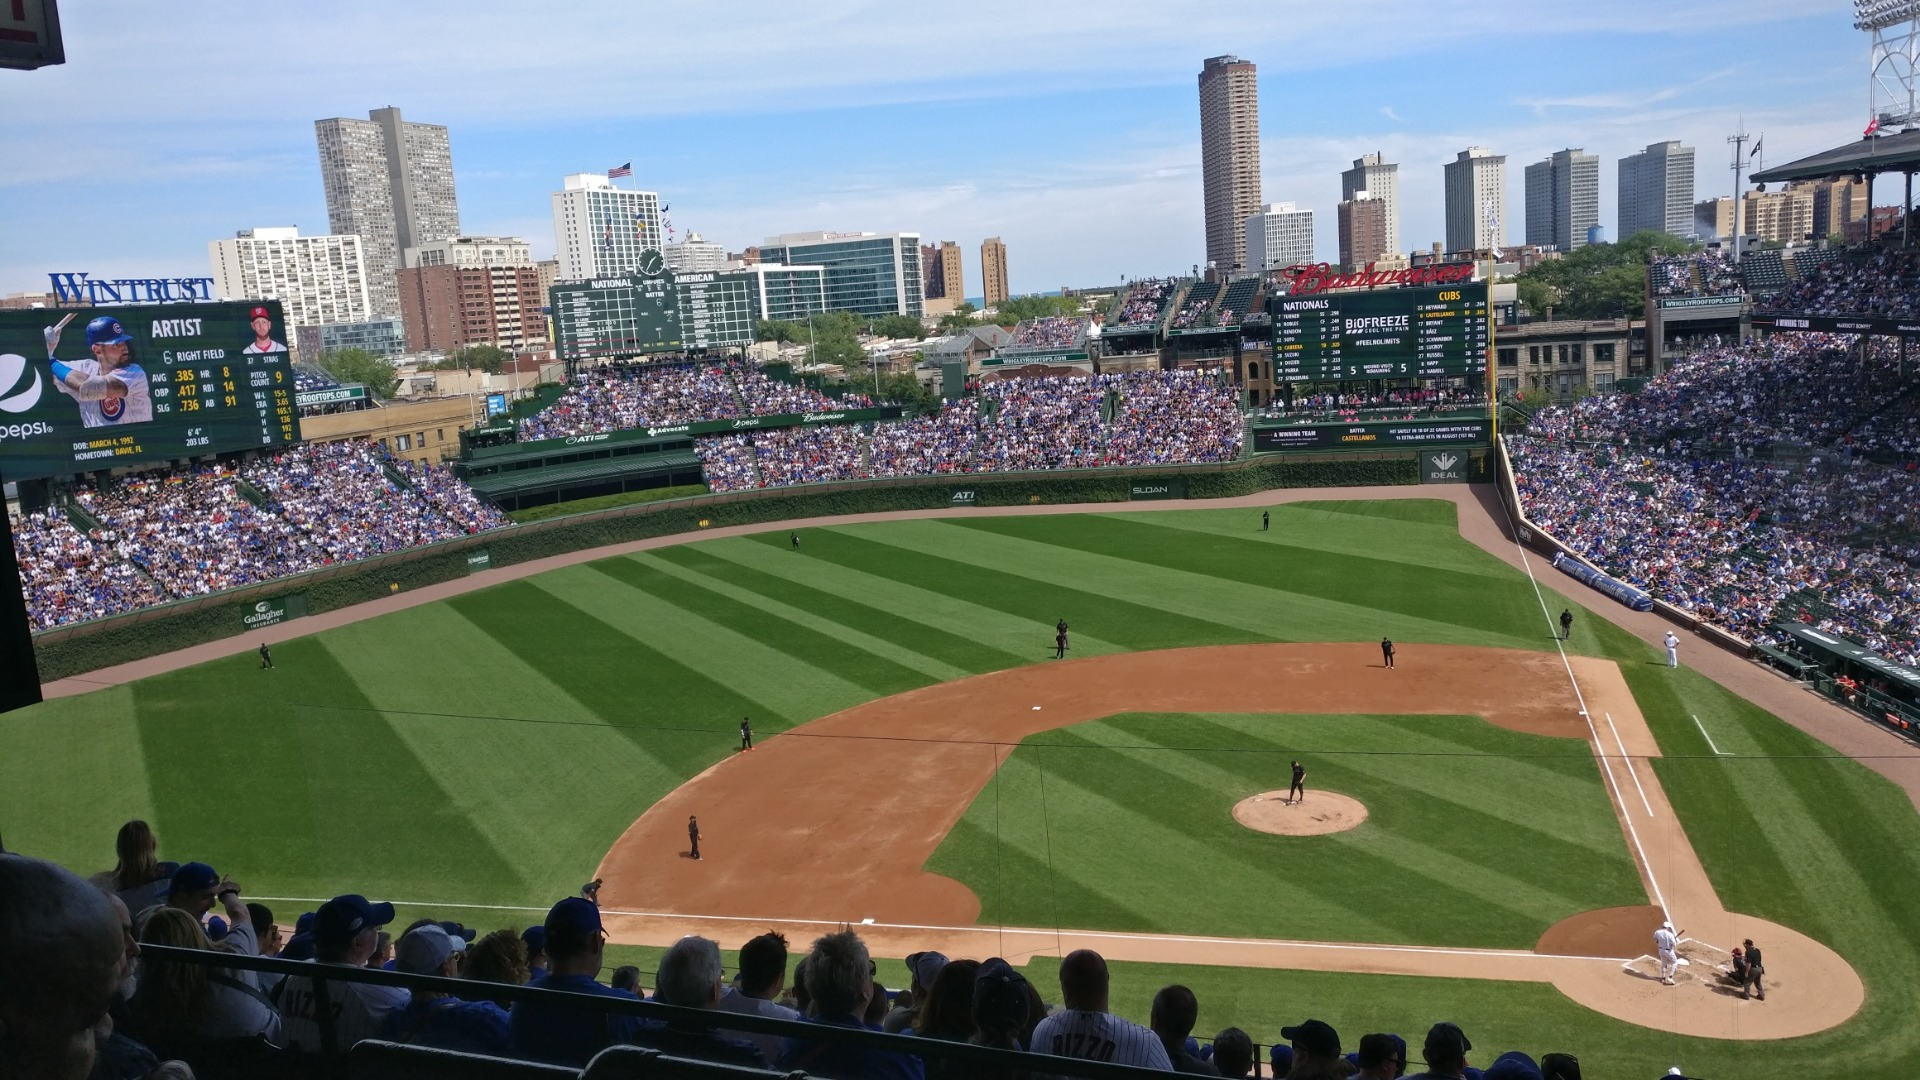 1920x1080 Wrigley Field section 413L row 2 seat 5 Chicago Cubs vs Washington Nationals shared by Jimjackcoke